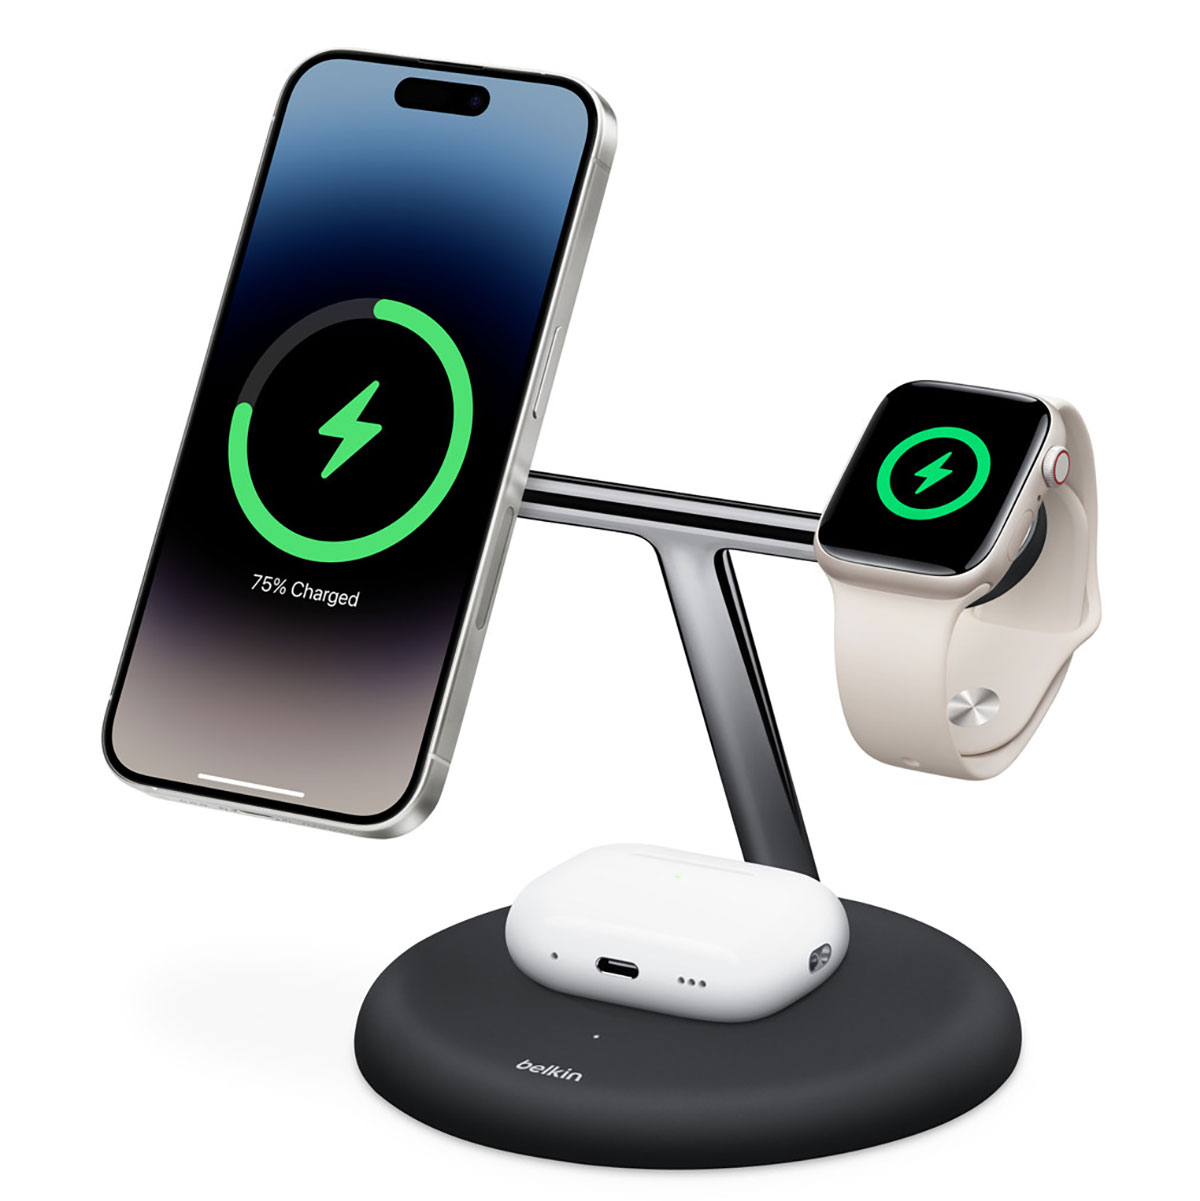 Belkin BoostCharge Pro 3-in-1 Magnetic Charging Stand